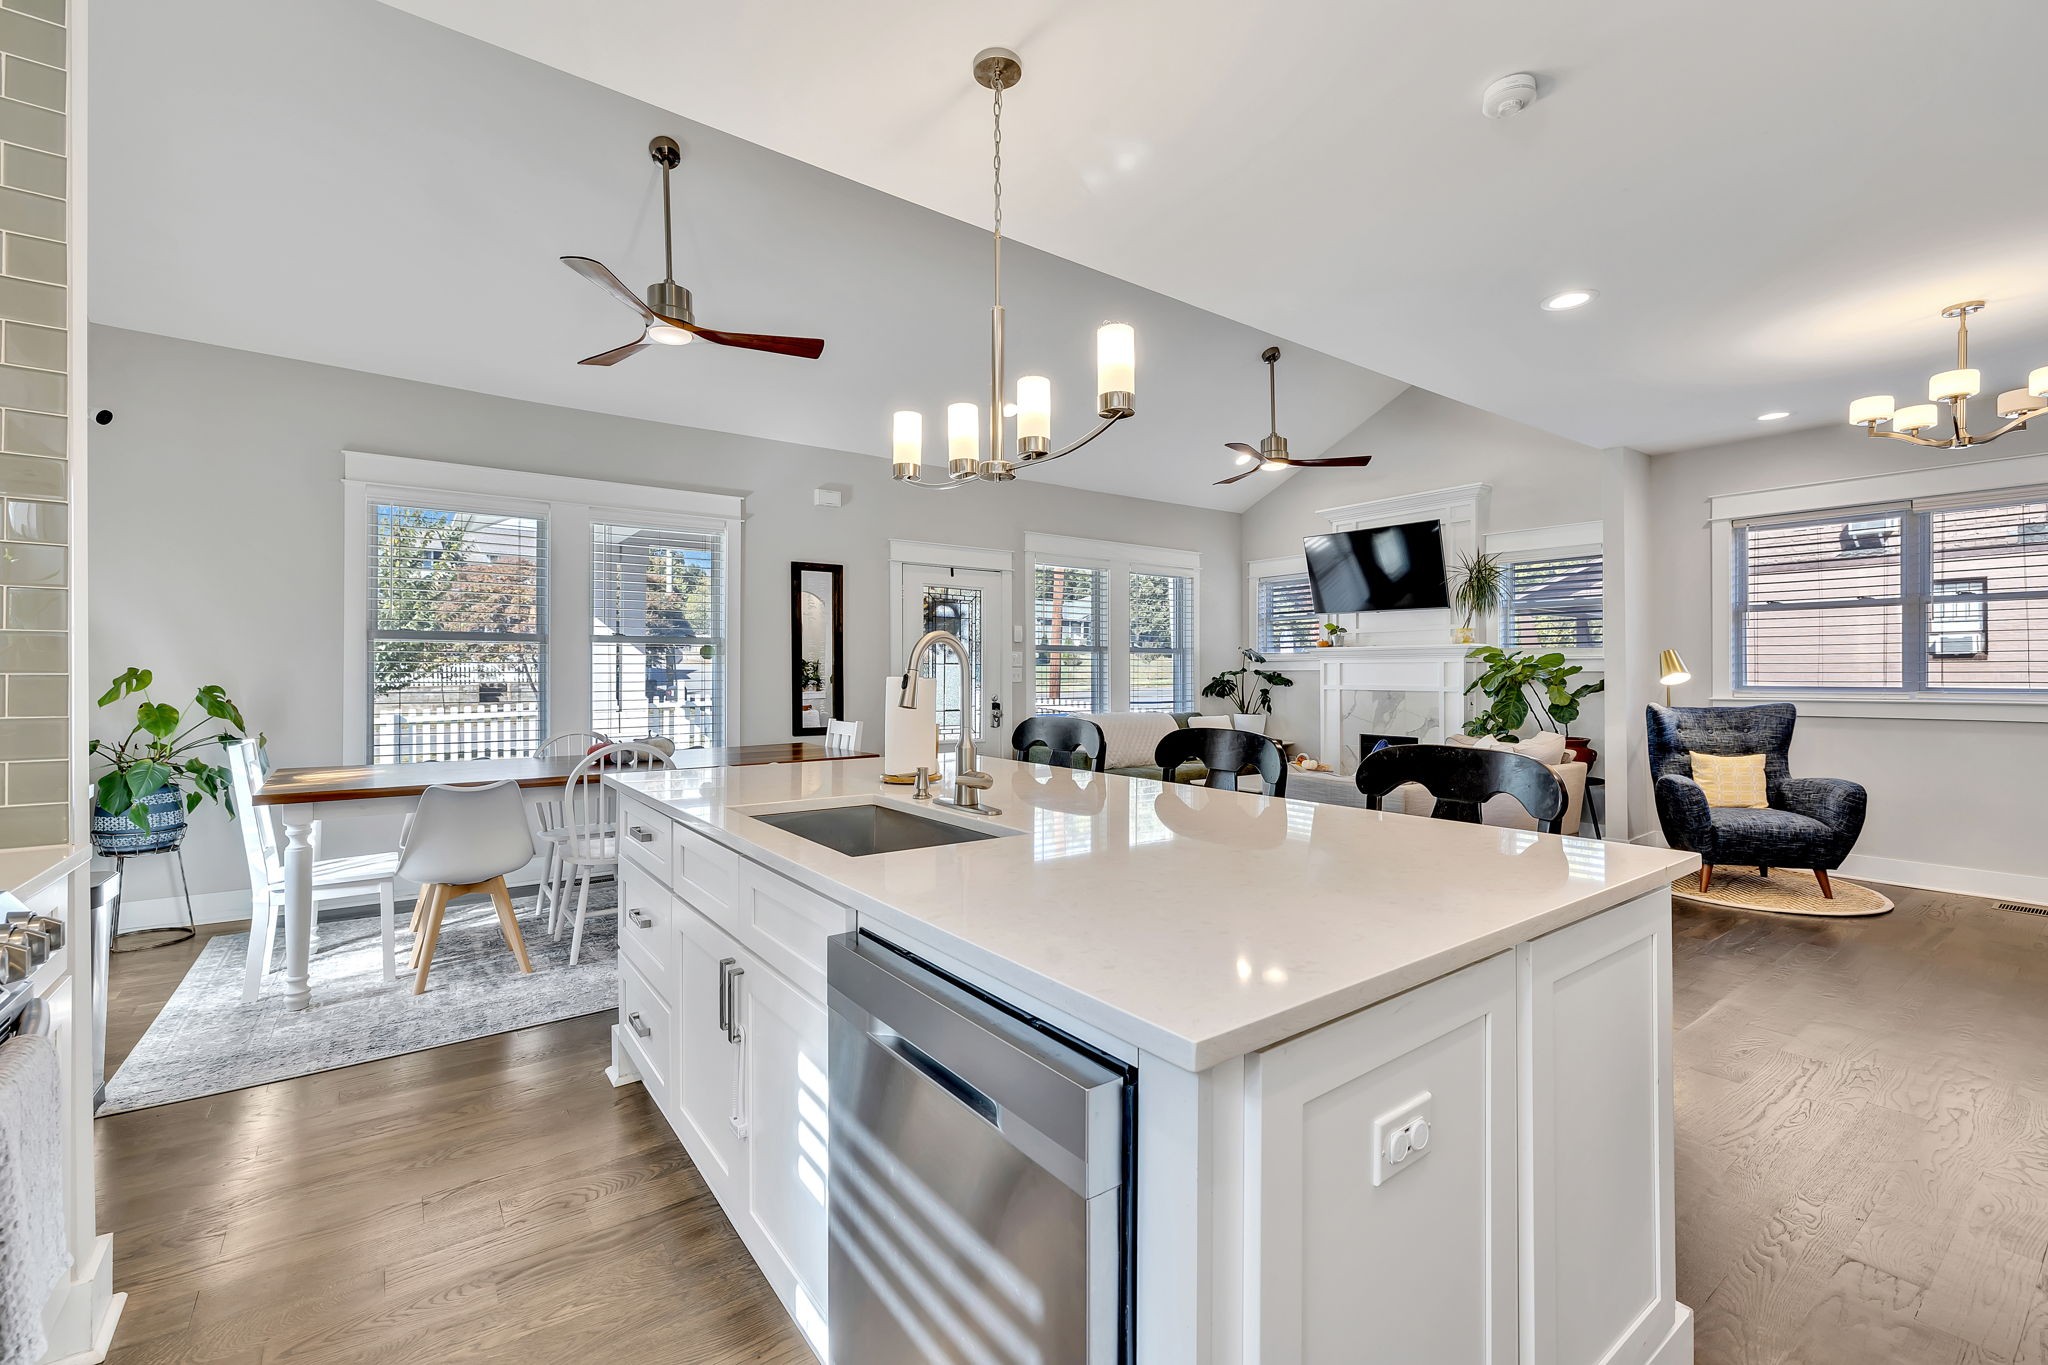 a view of living room kitchen with stainless steel appliances kitchen island a table chairs and a chandelier